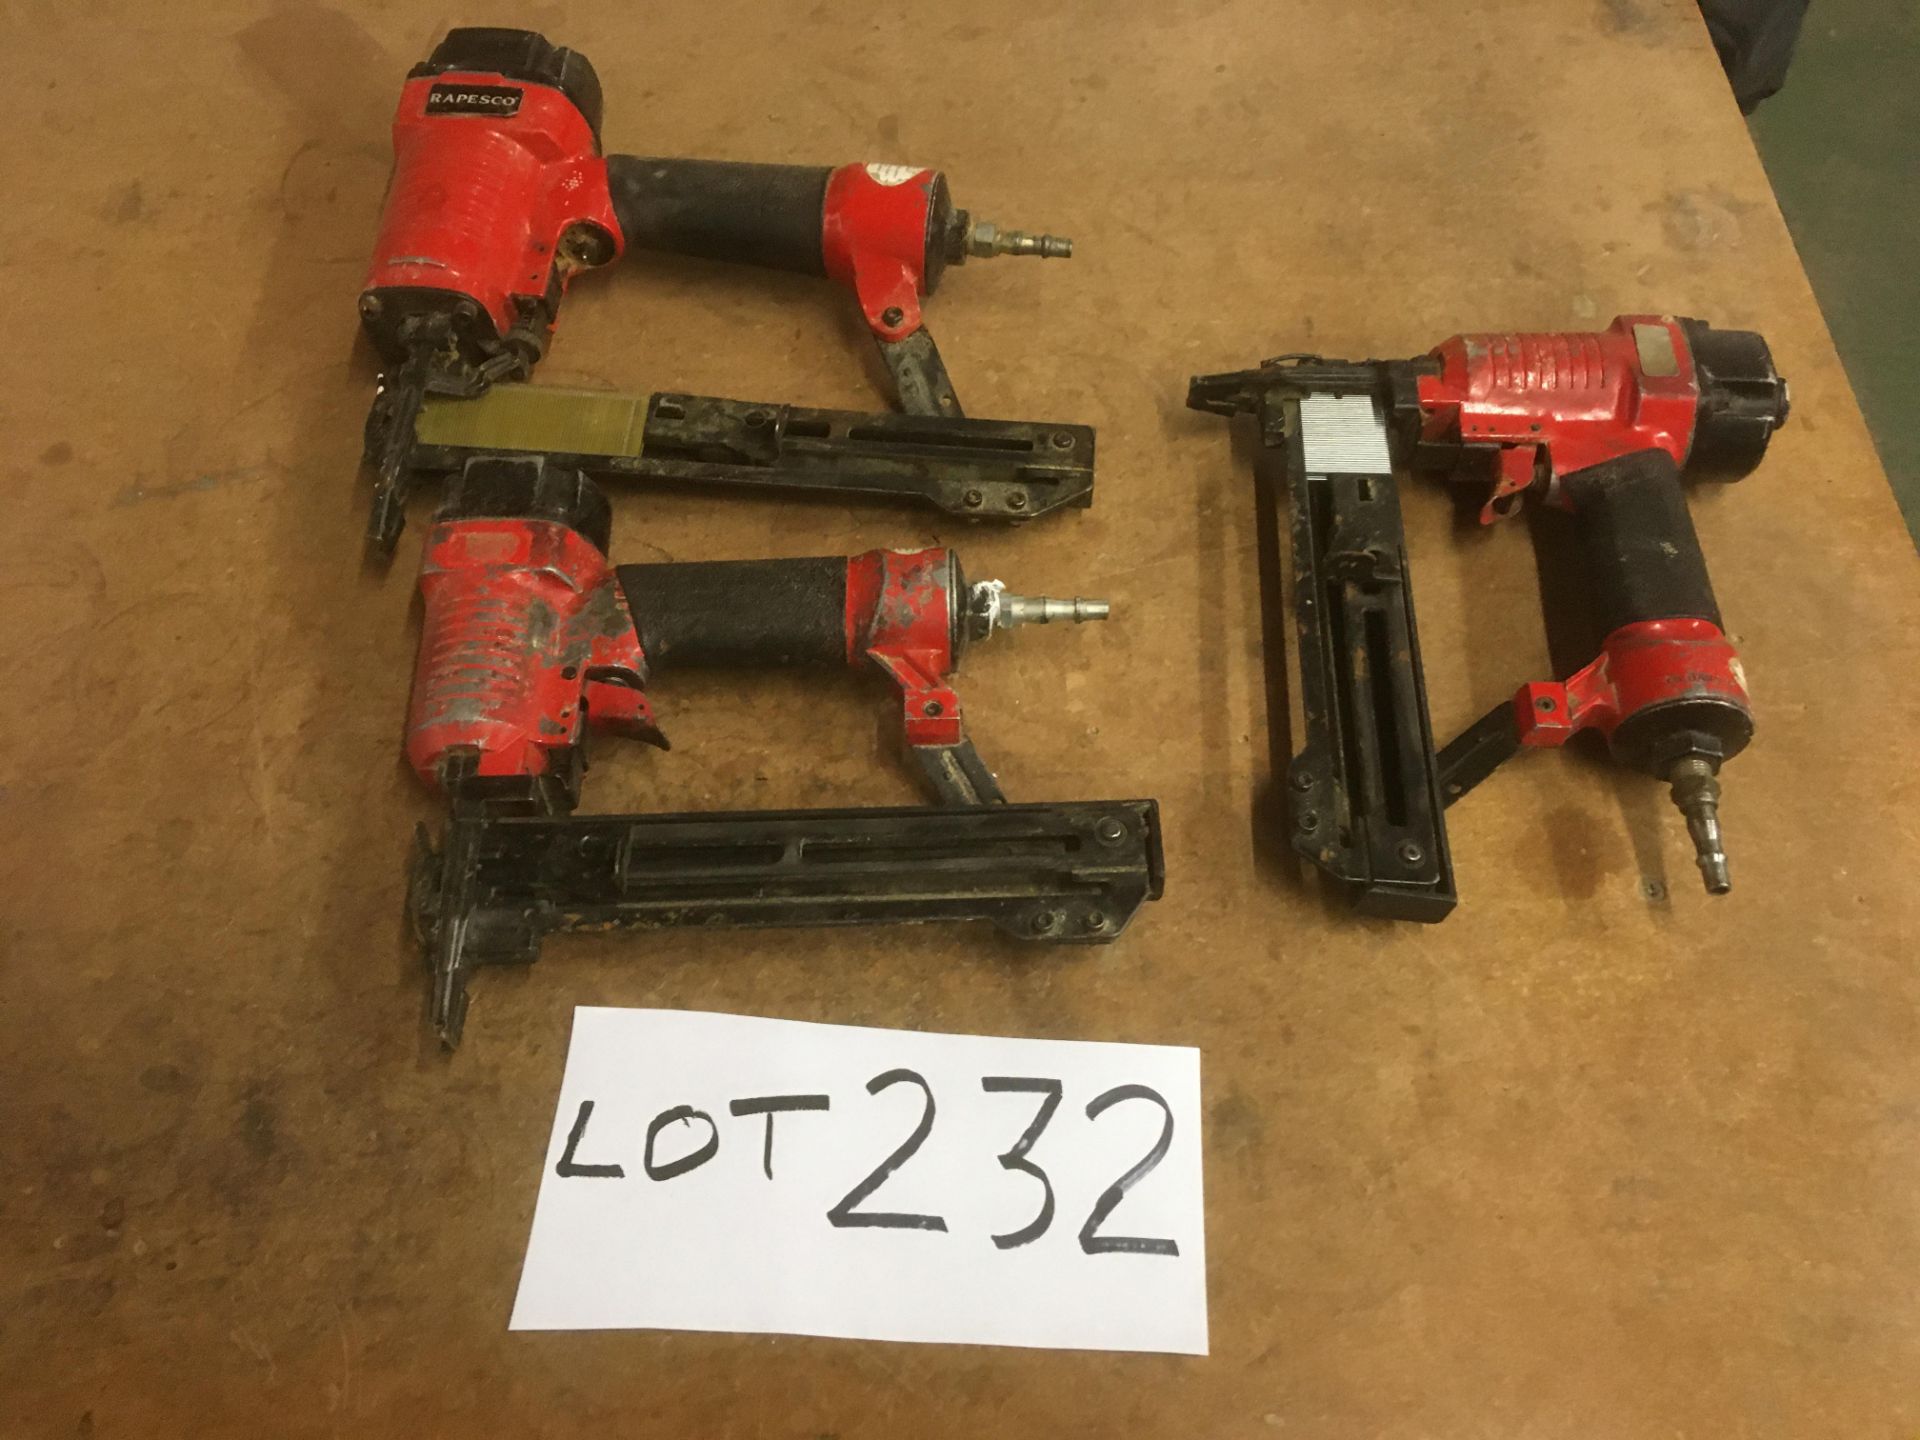 Two Staple Guns, vendors comments/condition report - both in working order (additional lot to